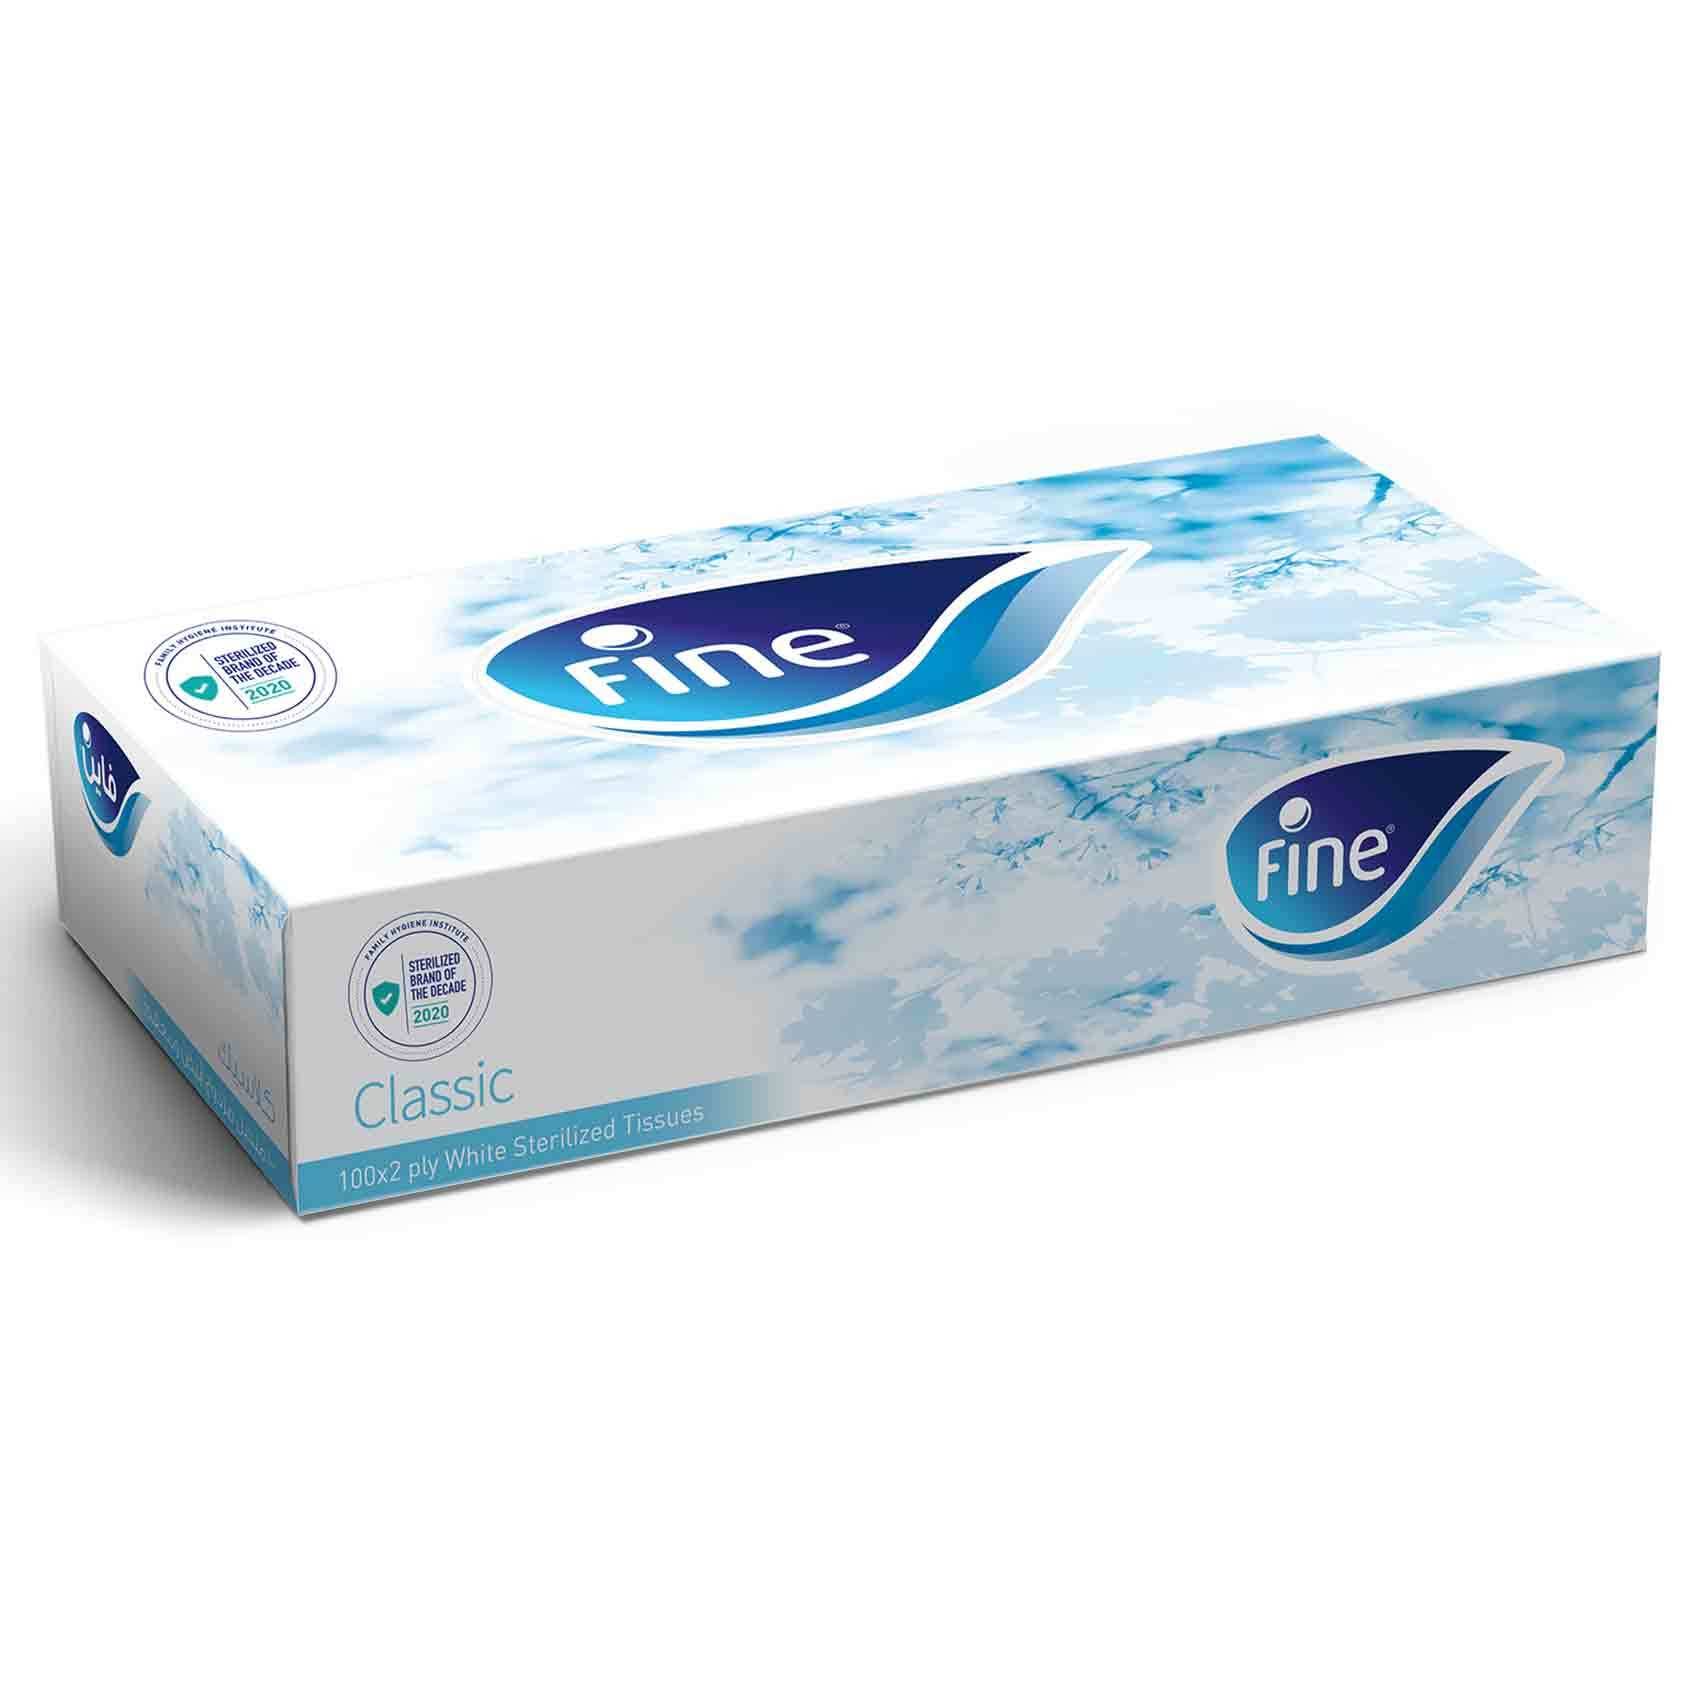 Fine Classic Facial tissue box 150 pulls X 2 ply bundle of 5 boxes